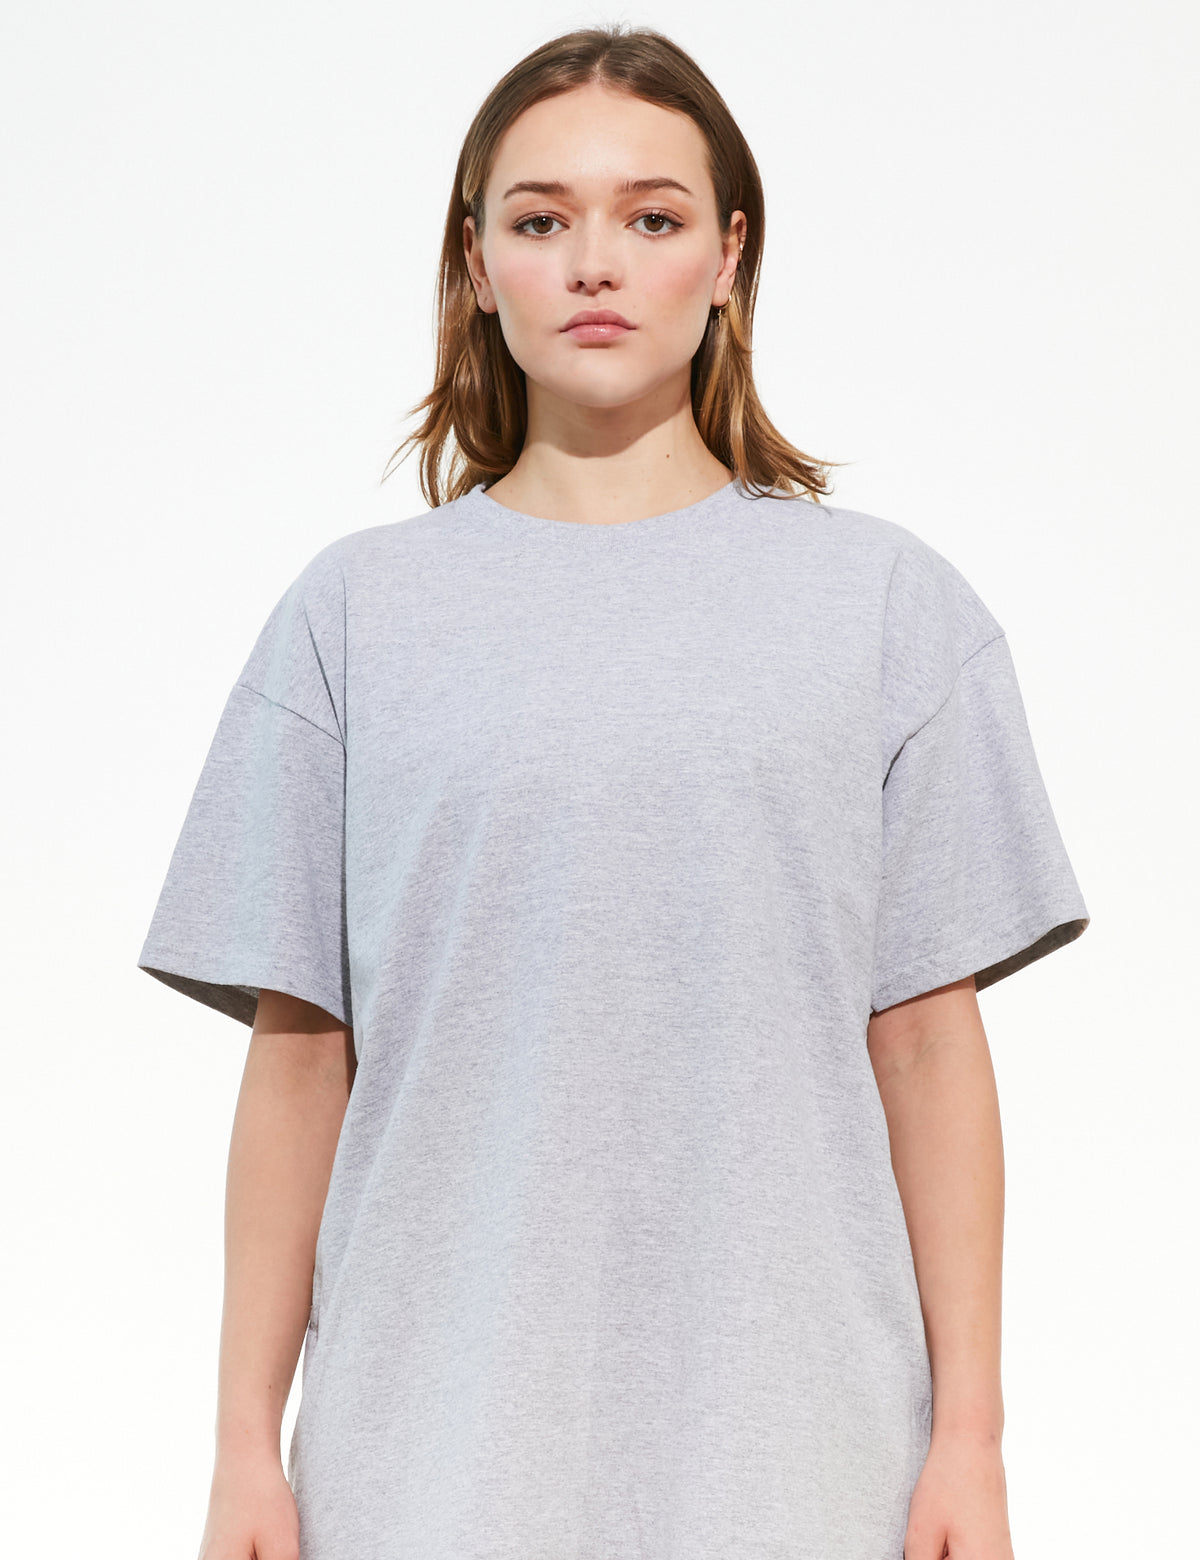 CONNECT GREY TEE